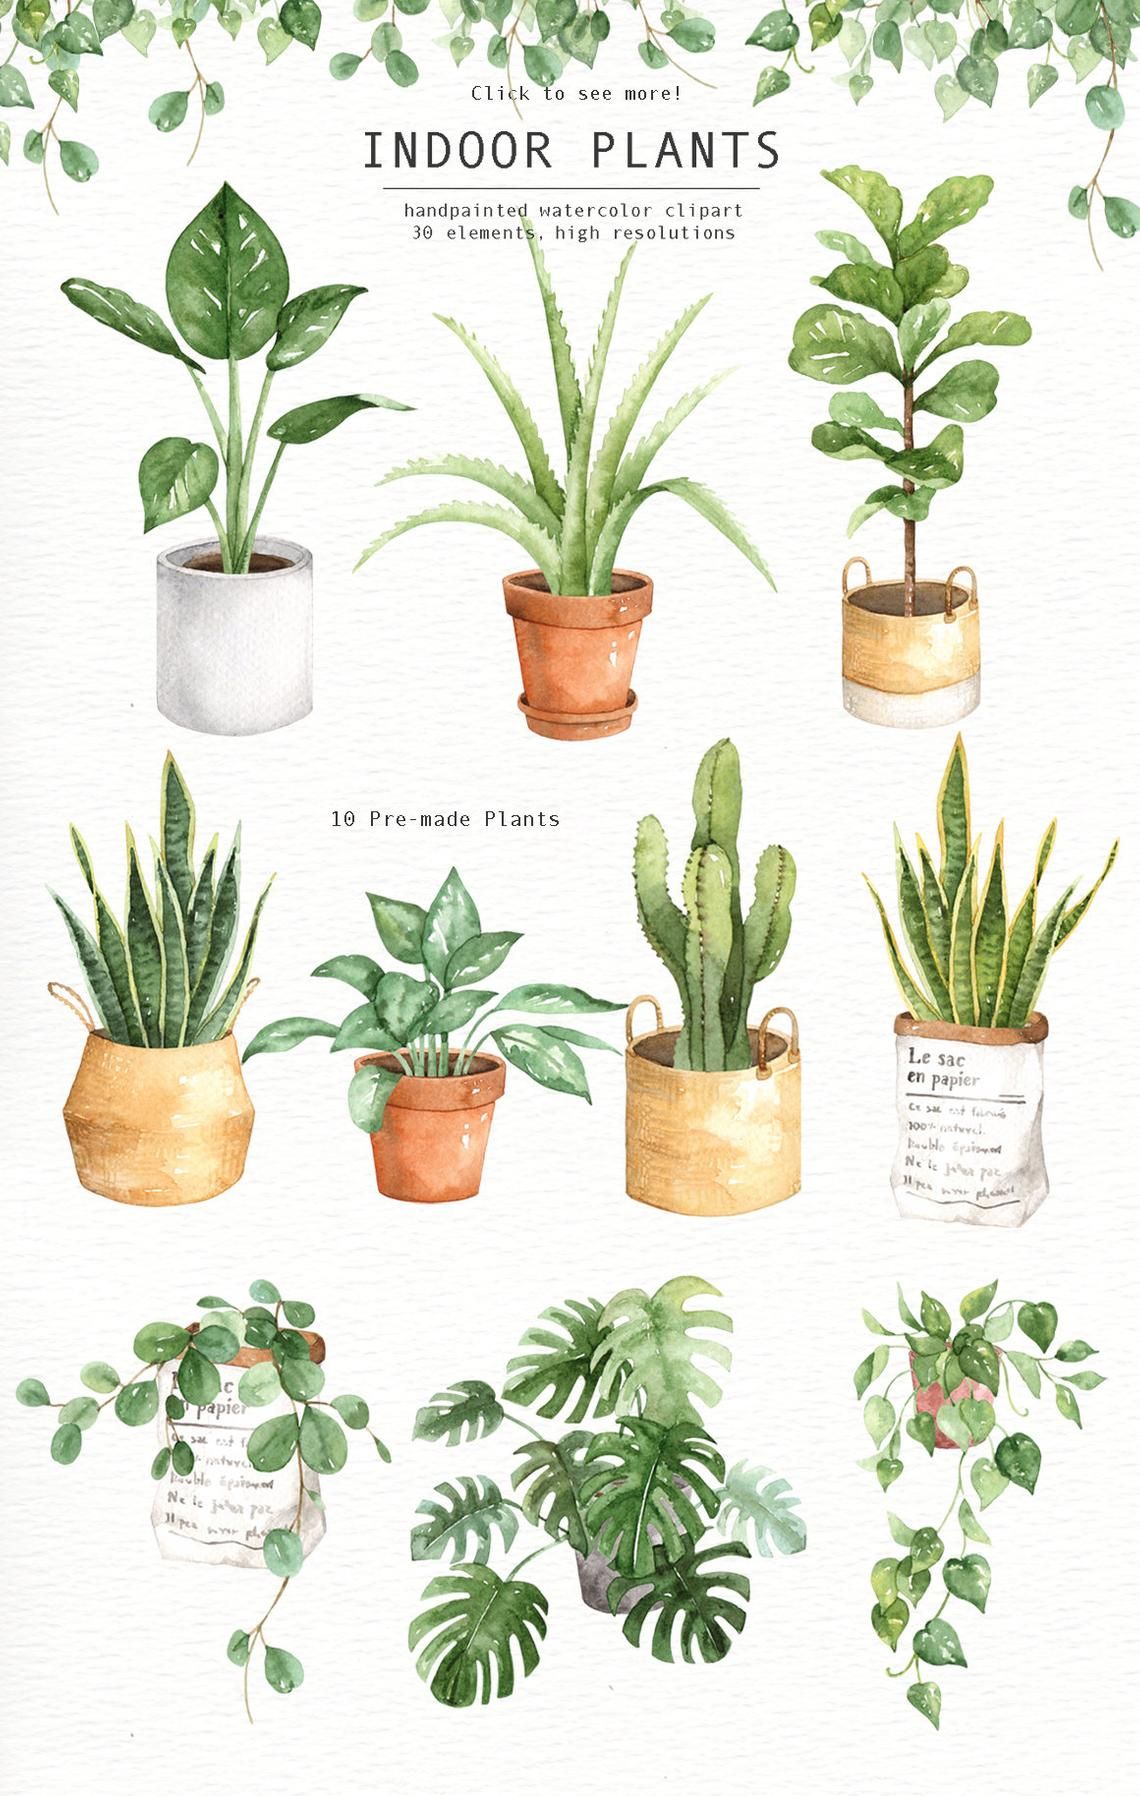 Indoor Plants Watercolor clipart, Watercolour Leaves.